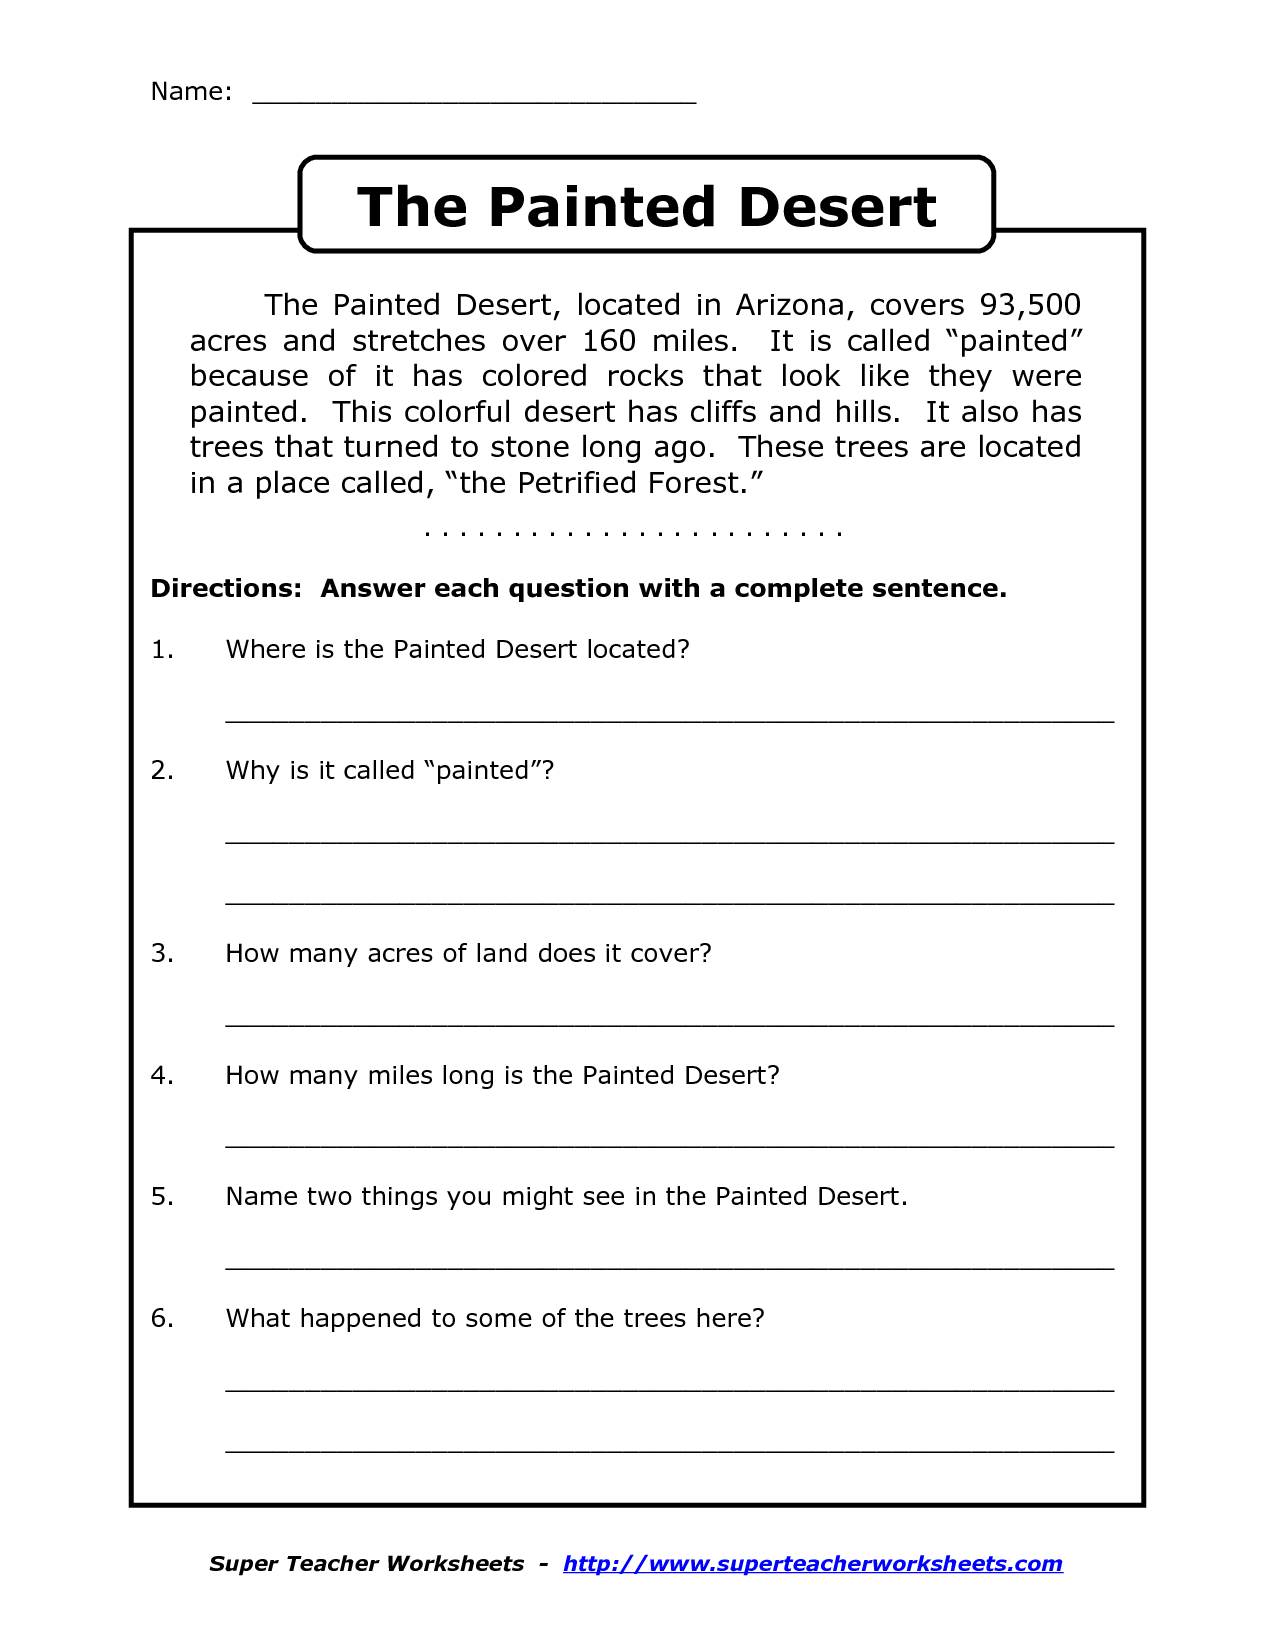 Reading Worksheets For 4Th Grade | Reading Comprehension Worksheets - Free Printable Reading Comprehension Worksheets Grade 5